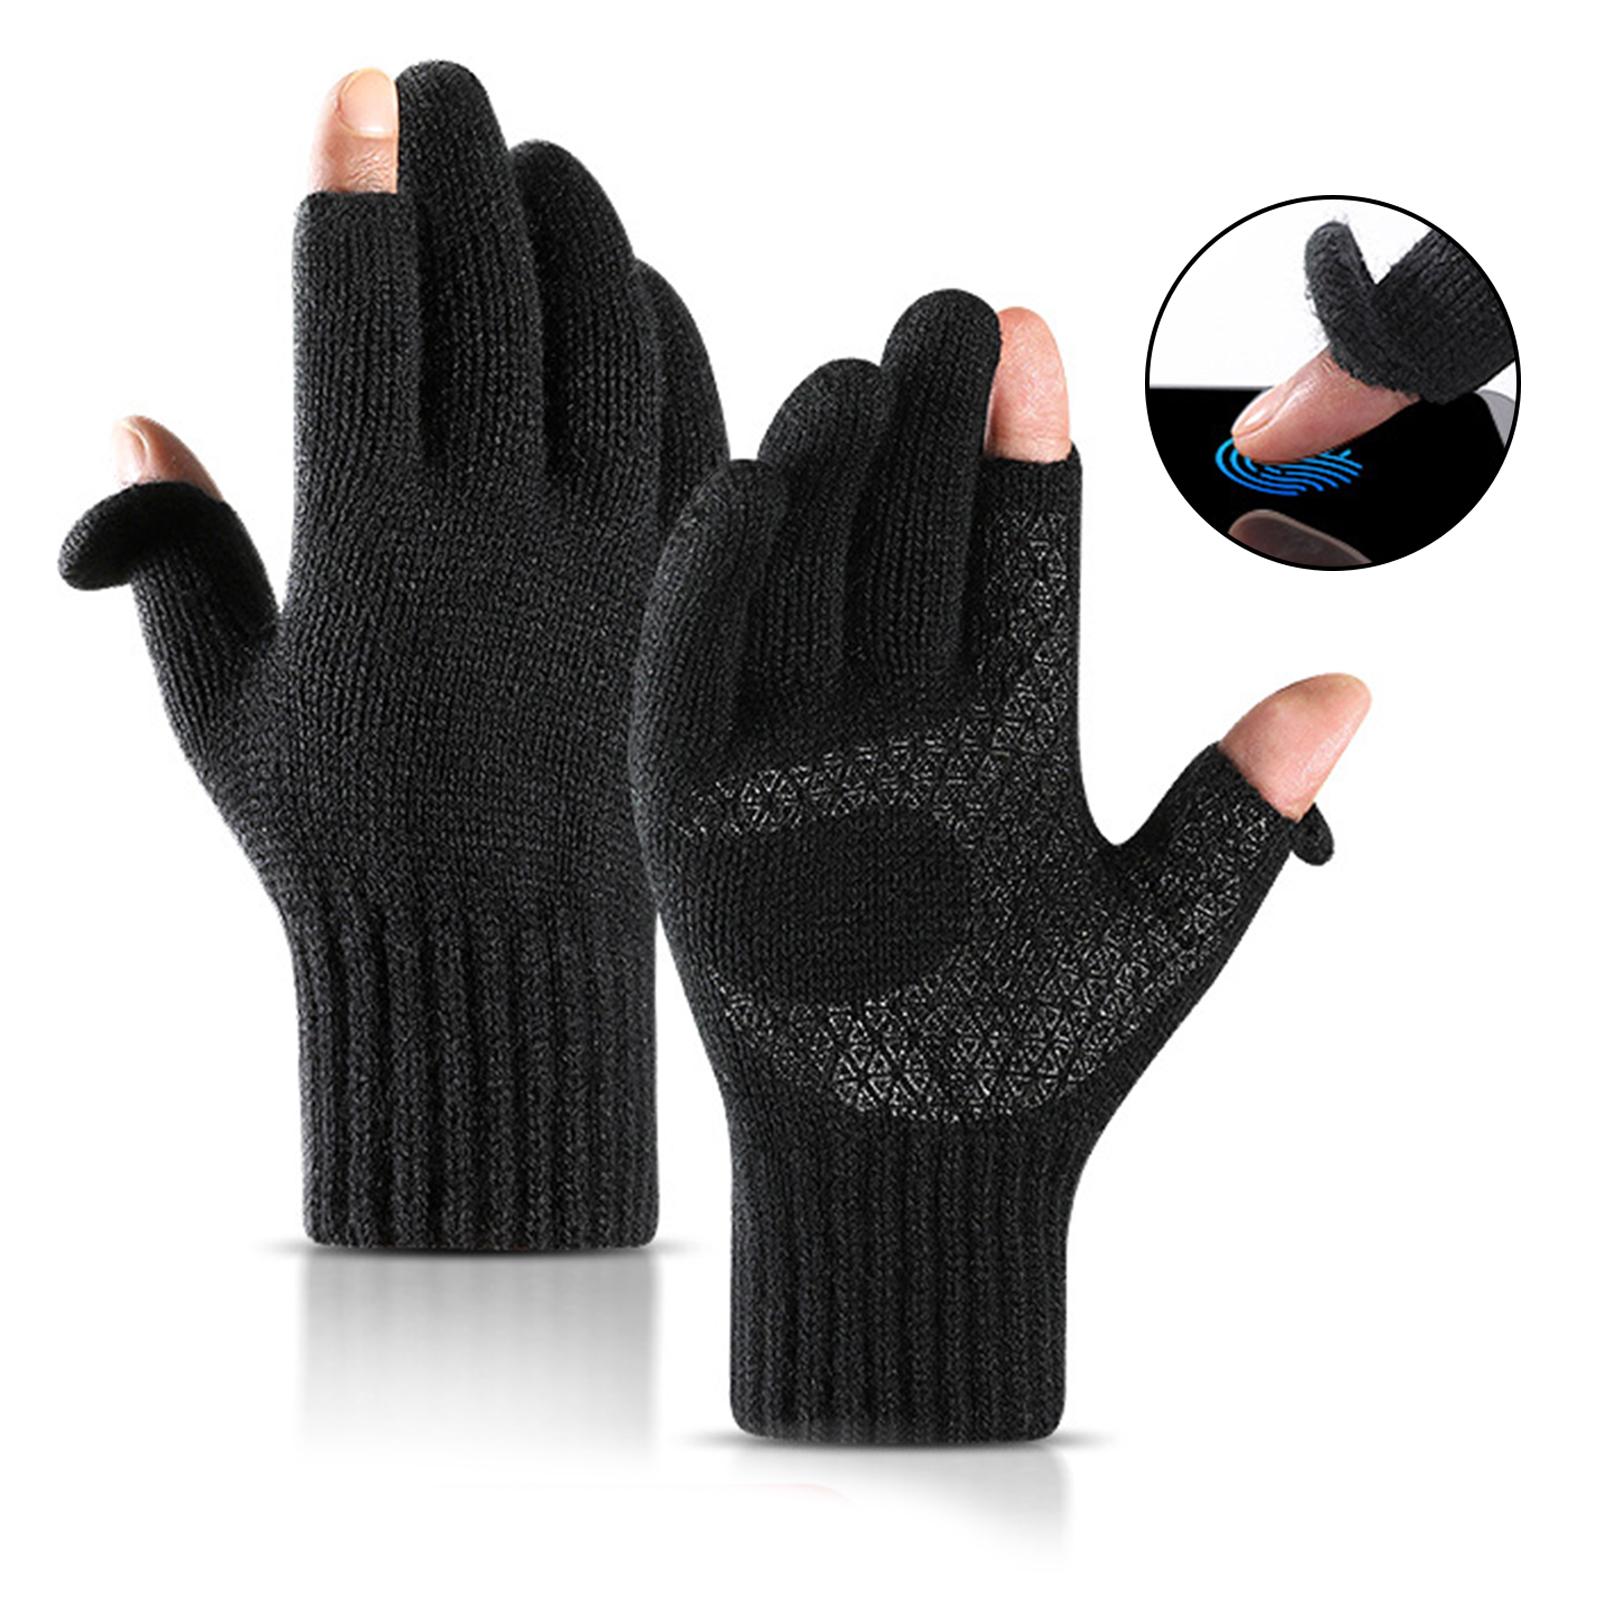 Men Women Touch Screen Winter Snow Gloves Warm Thick Knit Thermal Insulated Black XL